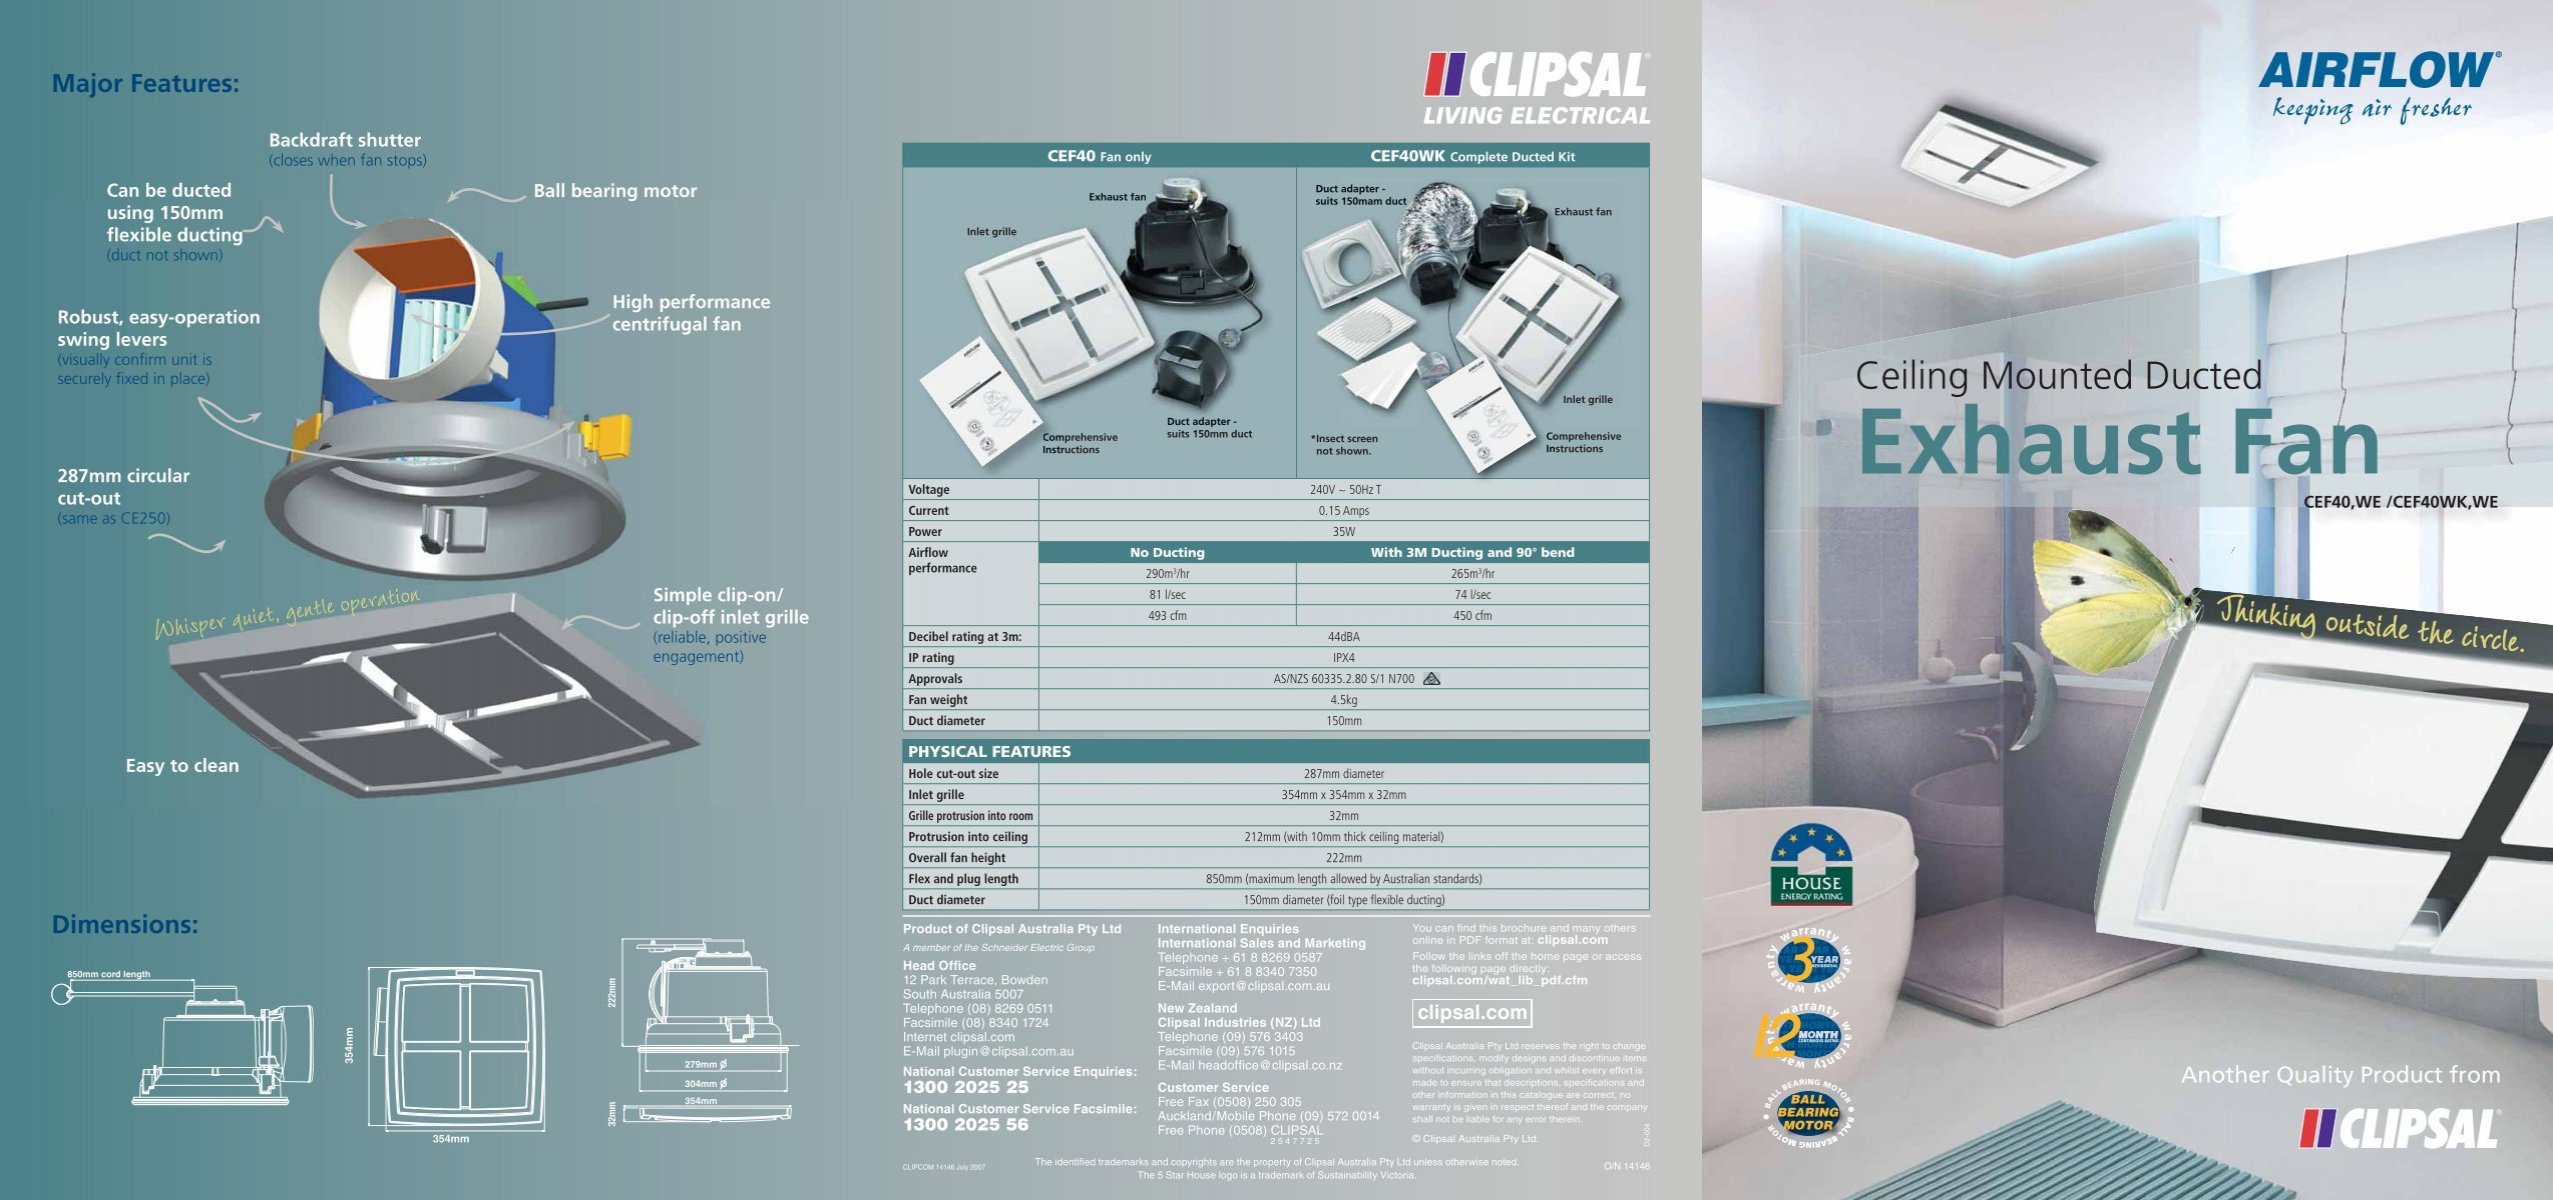 Ceiling Mounted Ducted Exhaust Fan 14146 Clipsal